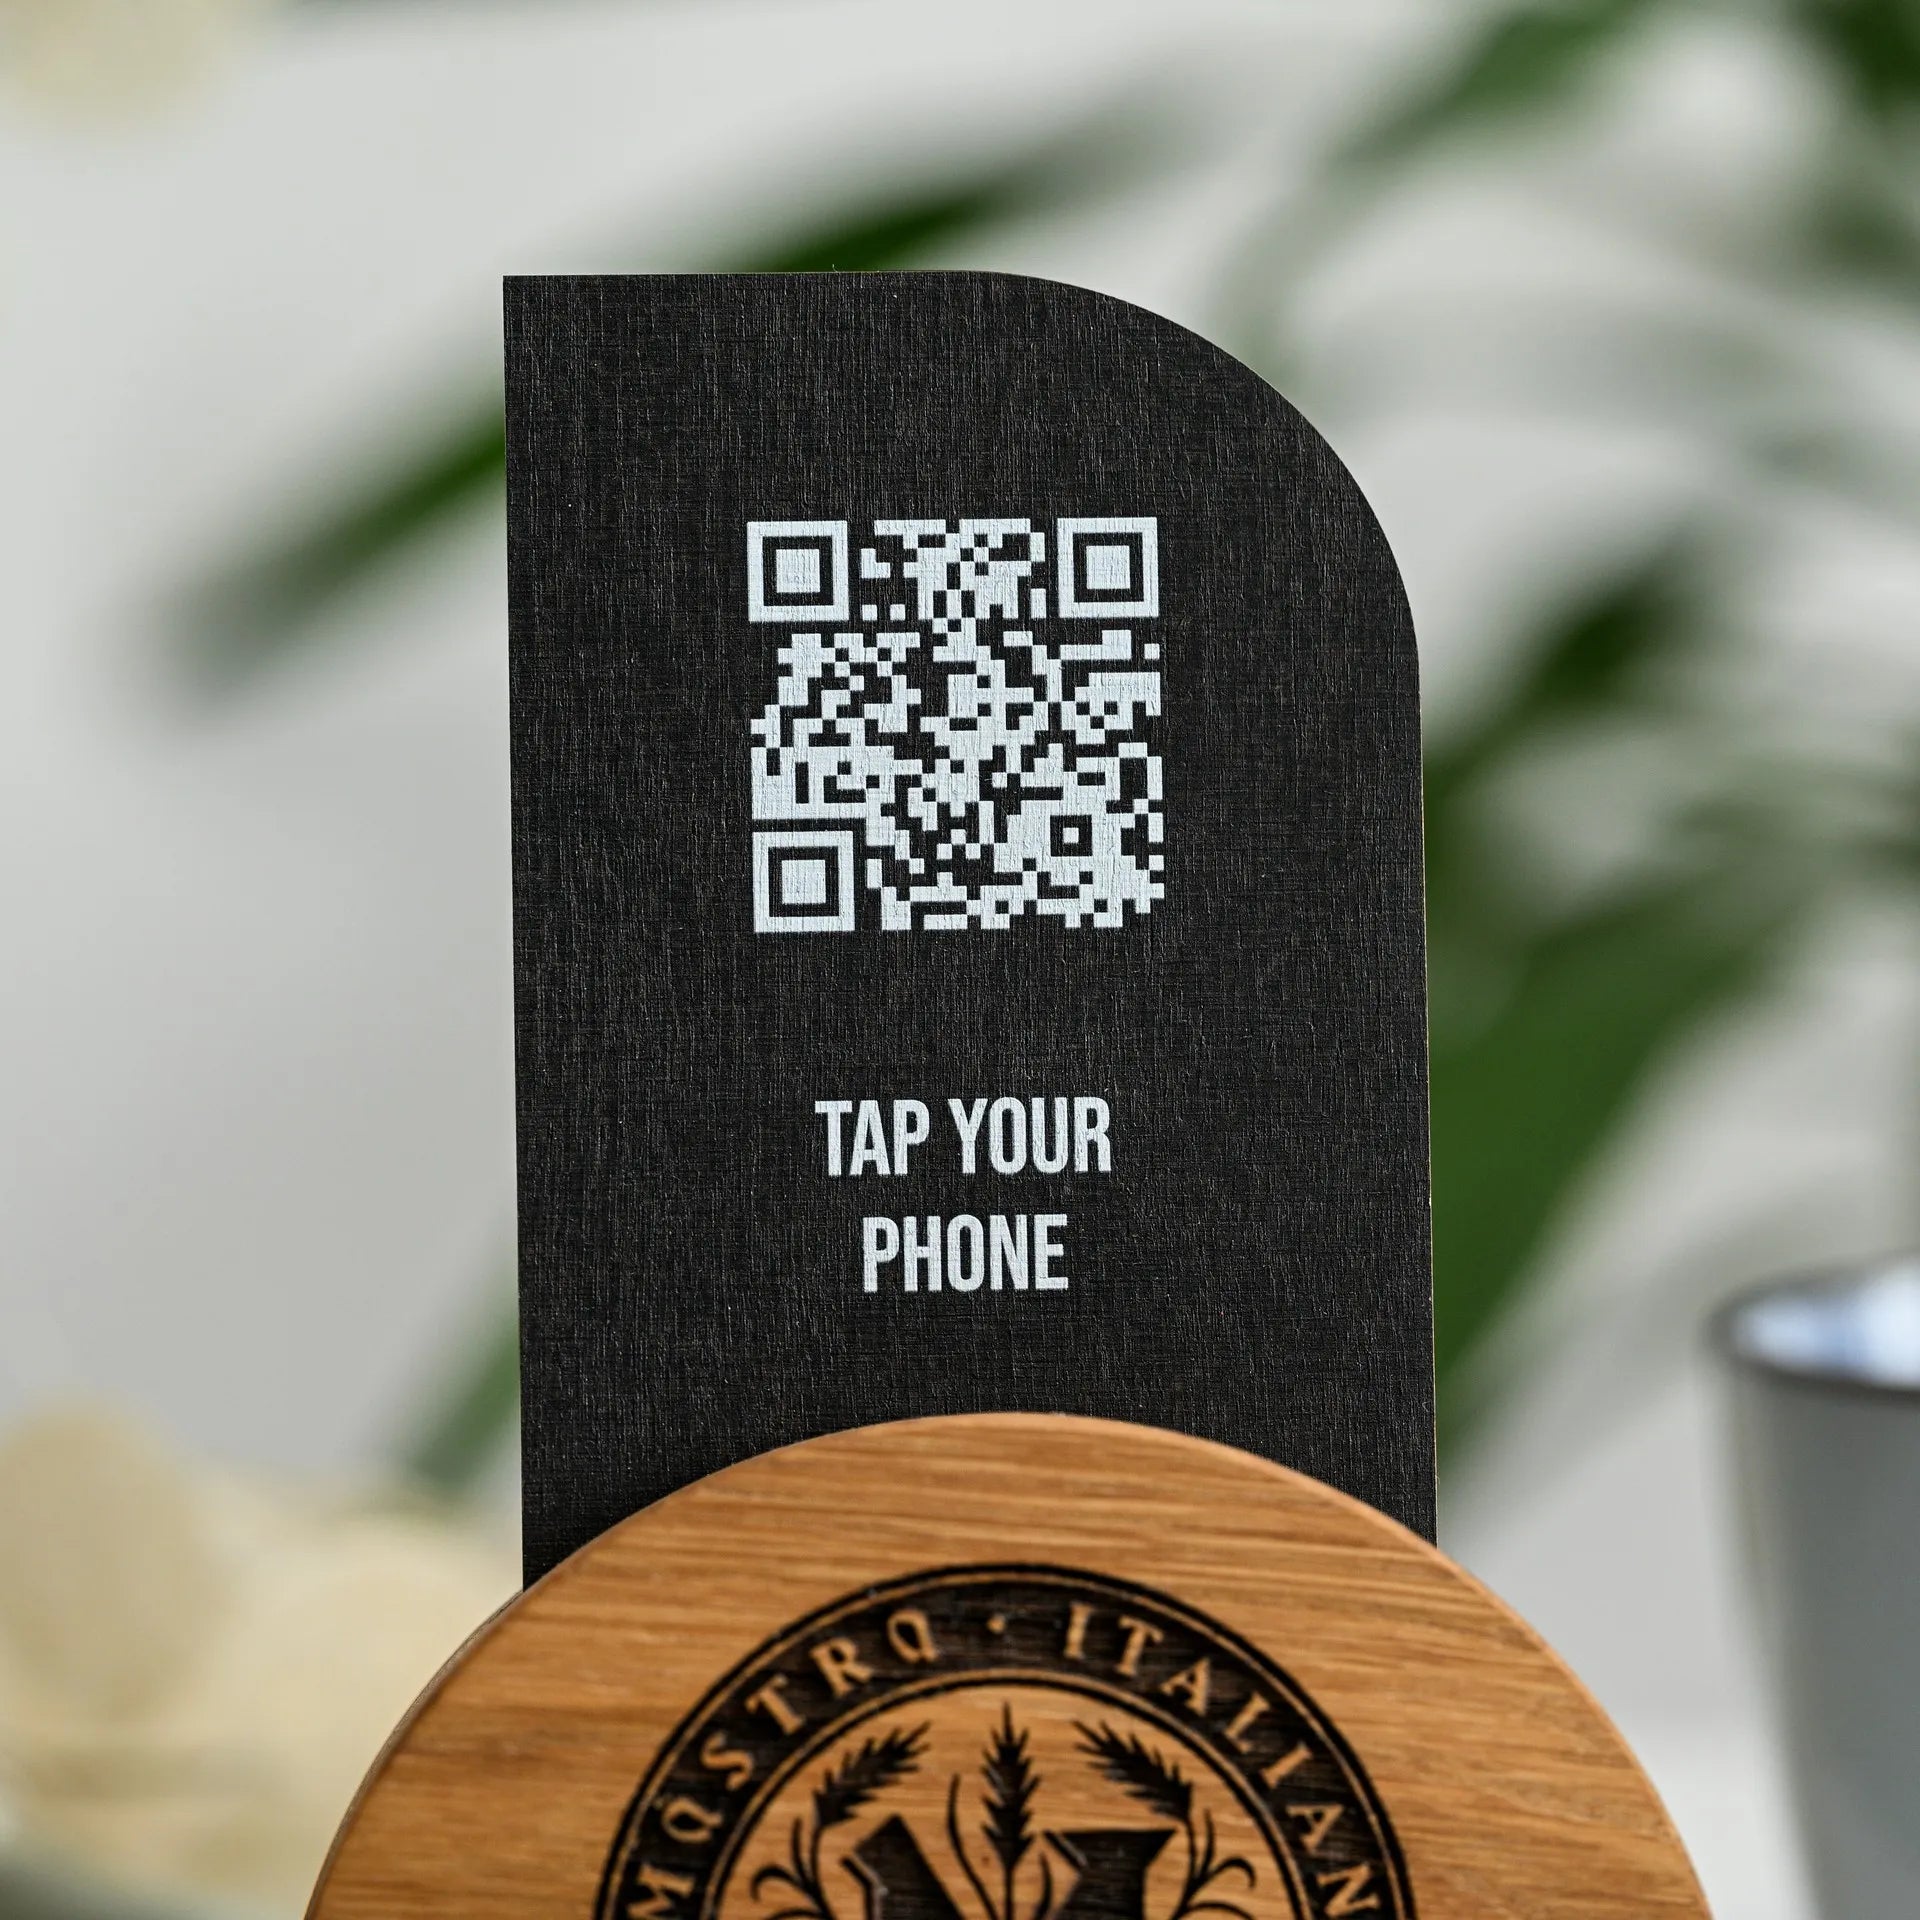 Discover a new way to dine with our universal restaurant menu tabletop sign, equipped with NFC tag and QR code functionality for enhanced accessibility.